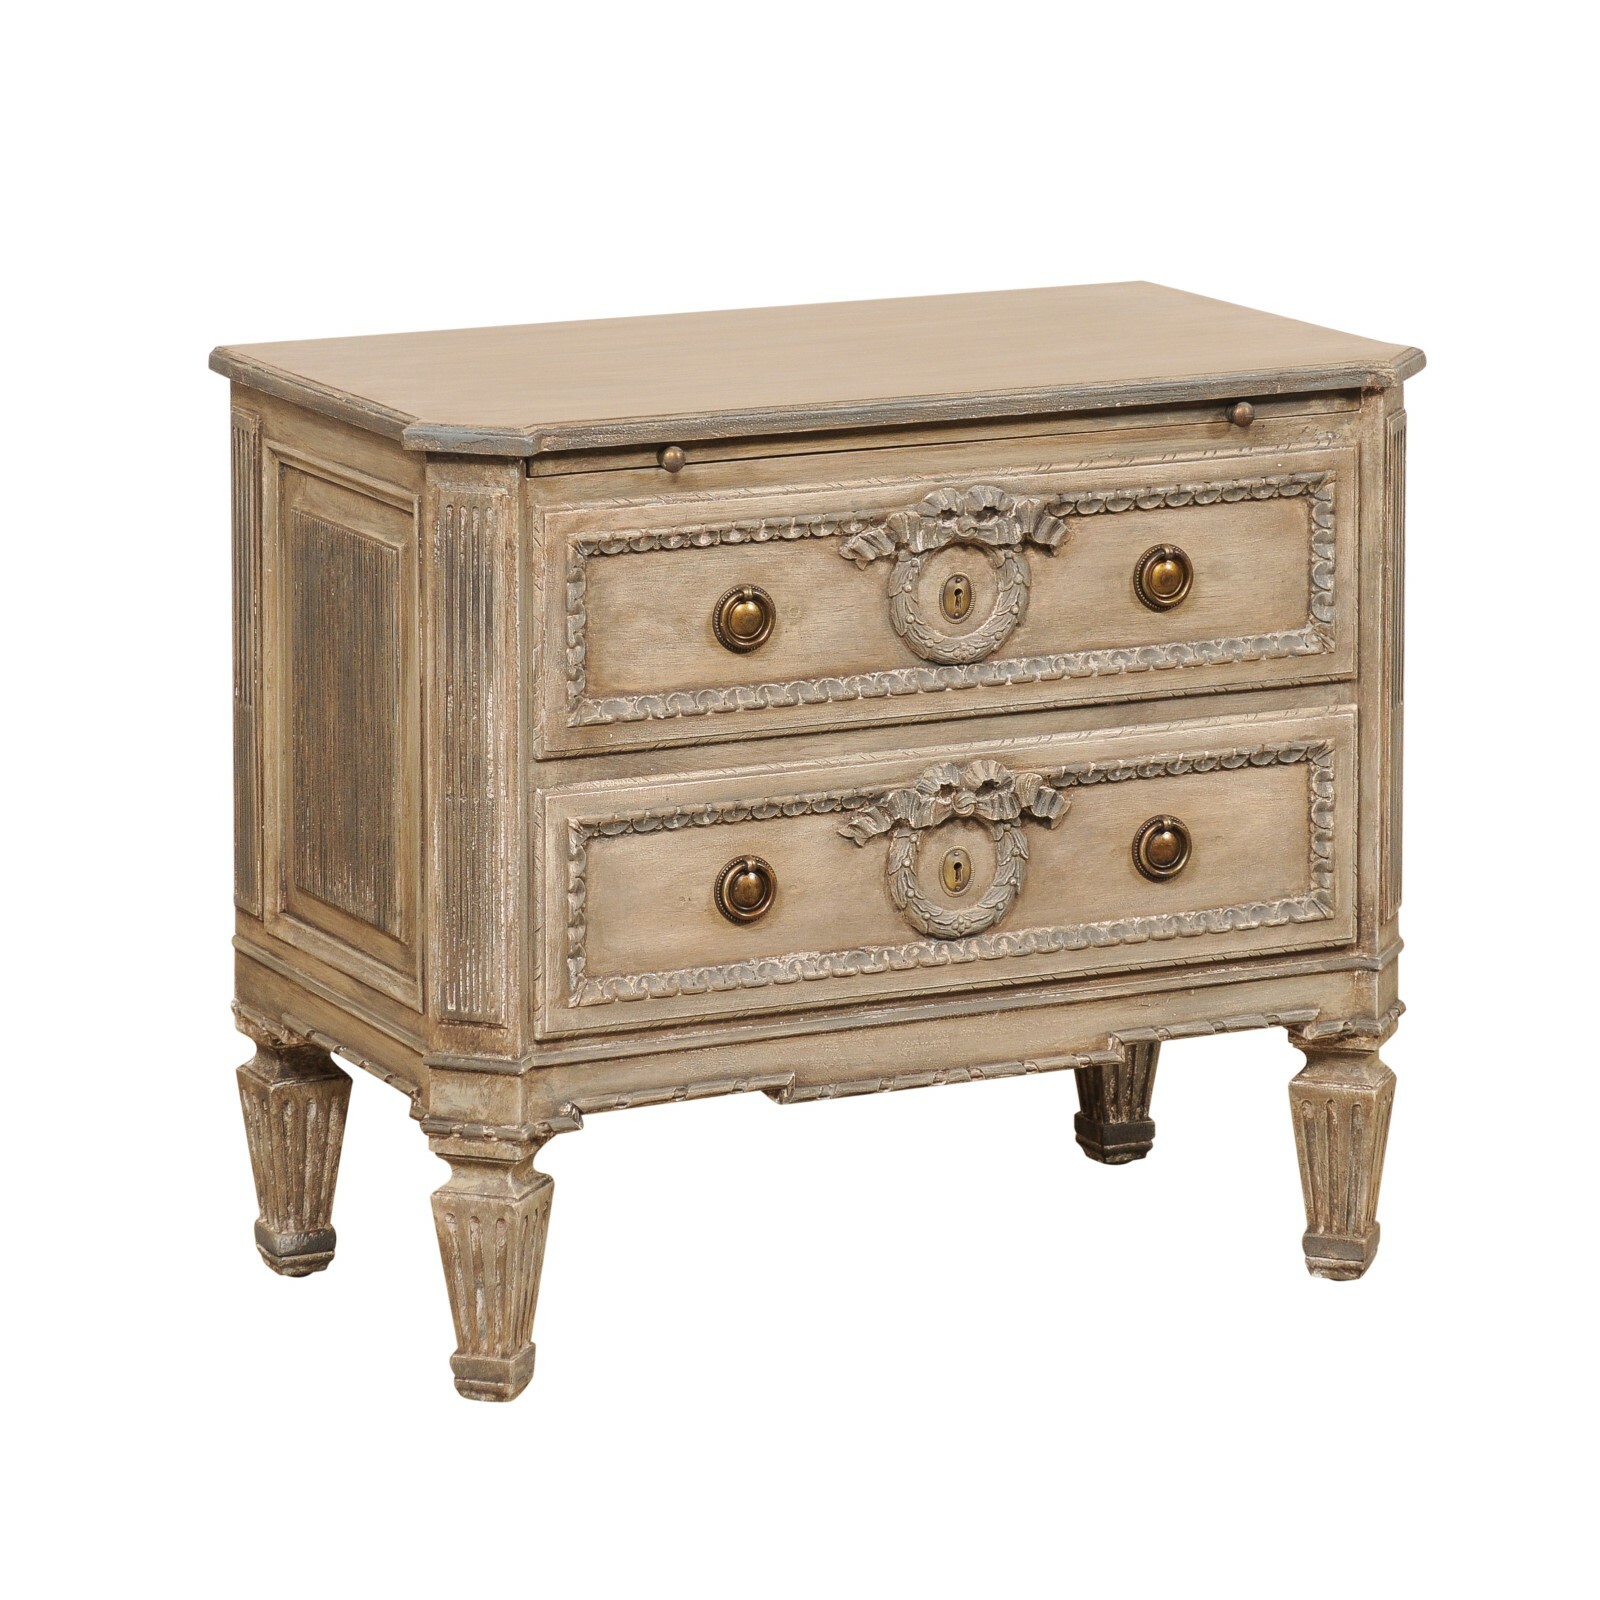 An Italian Neoclassic Style Side Chest